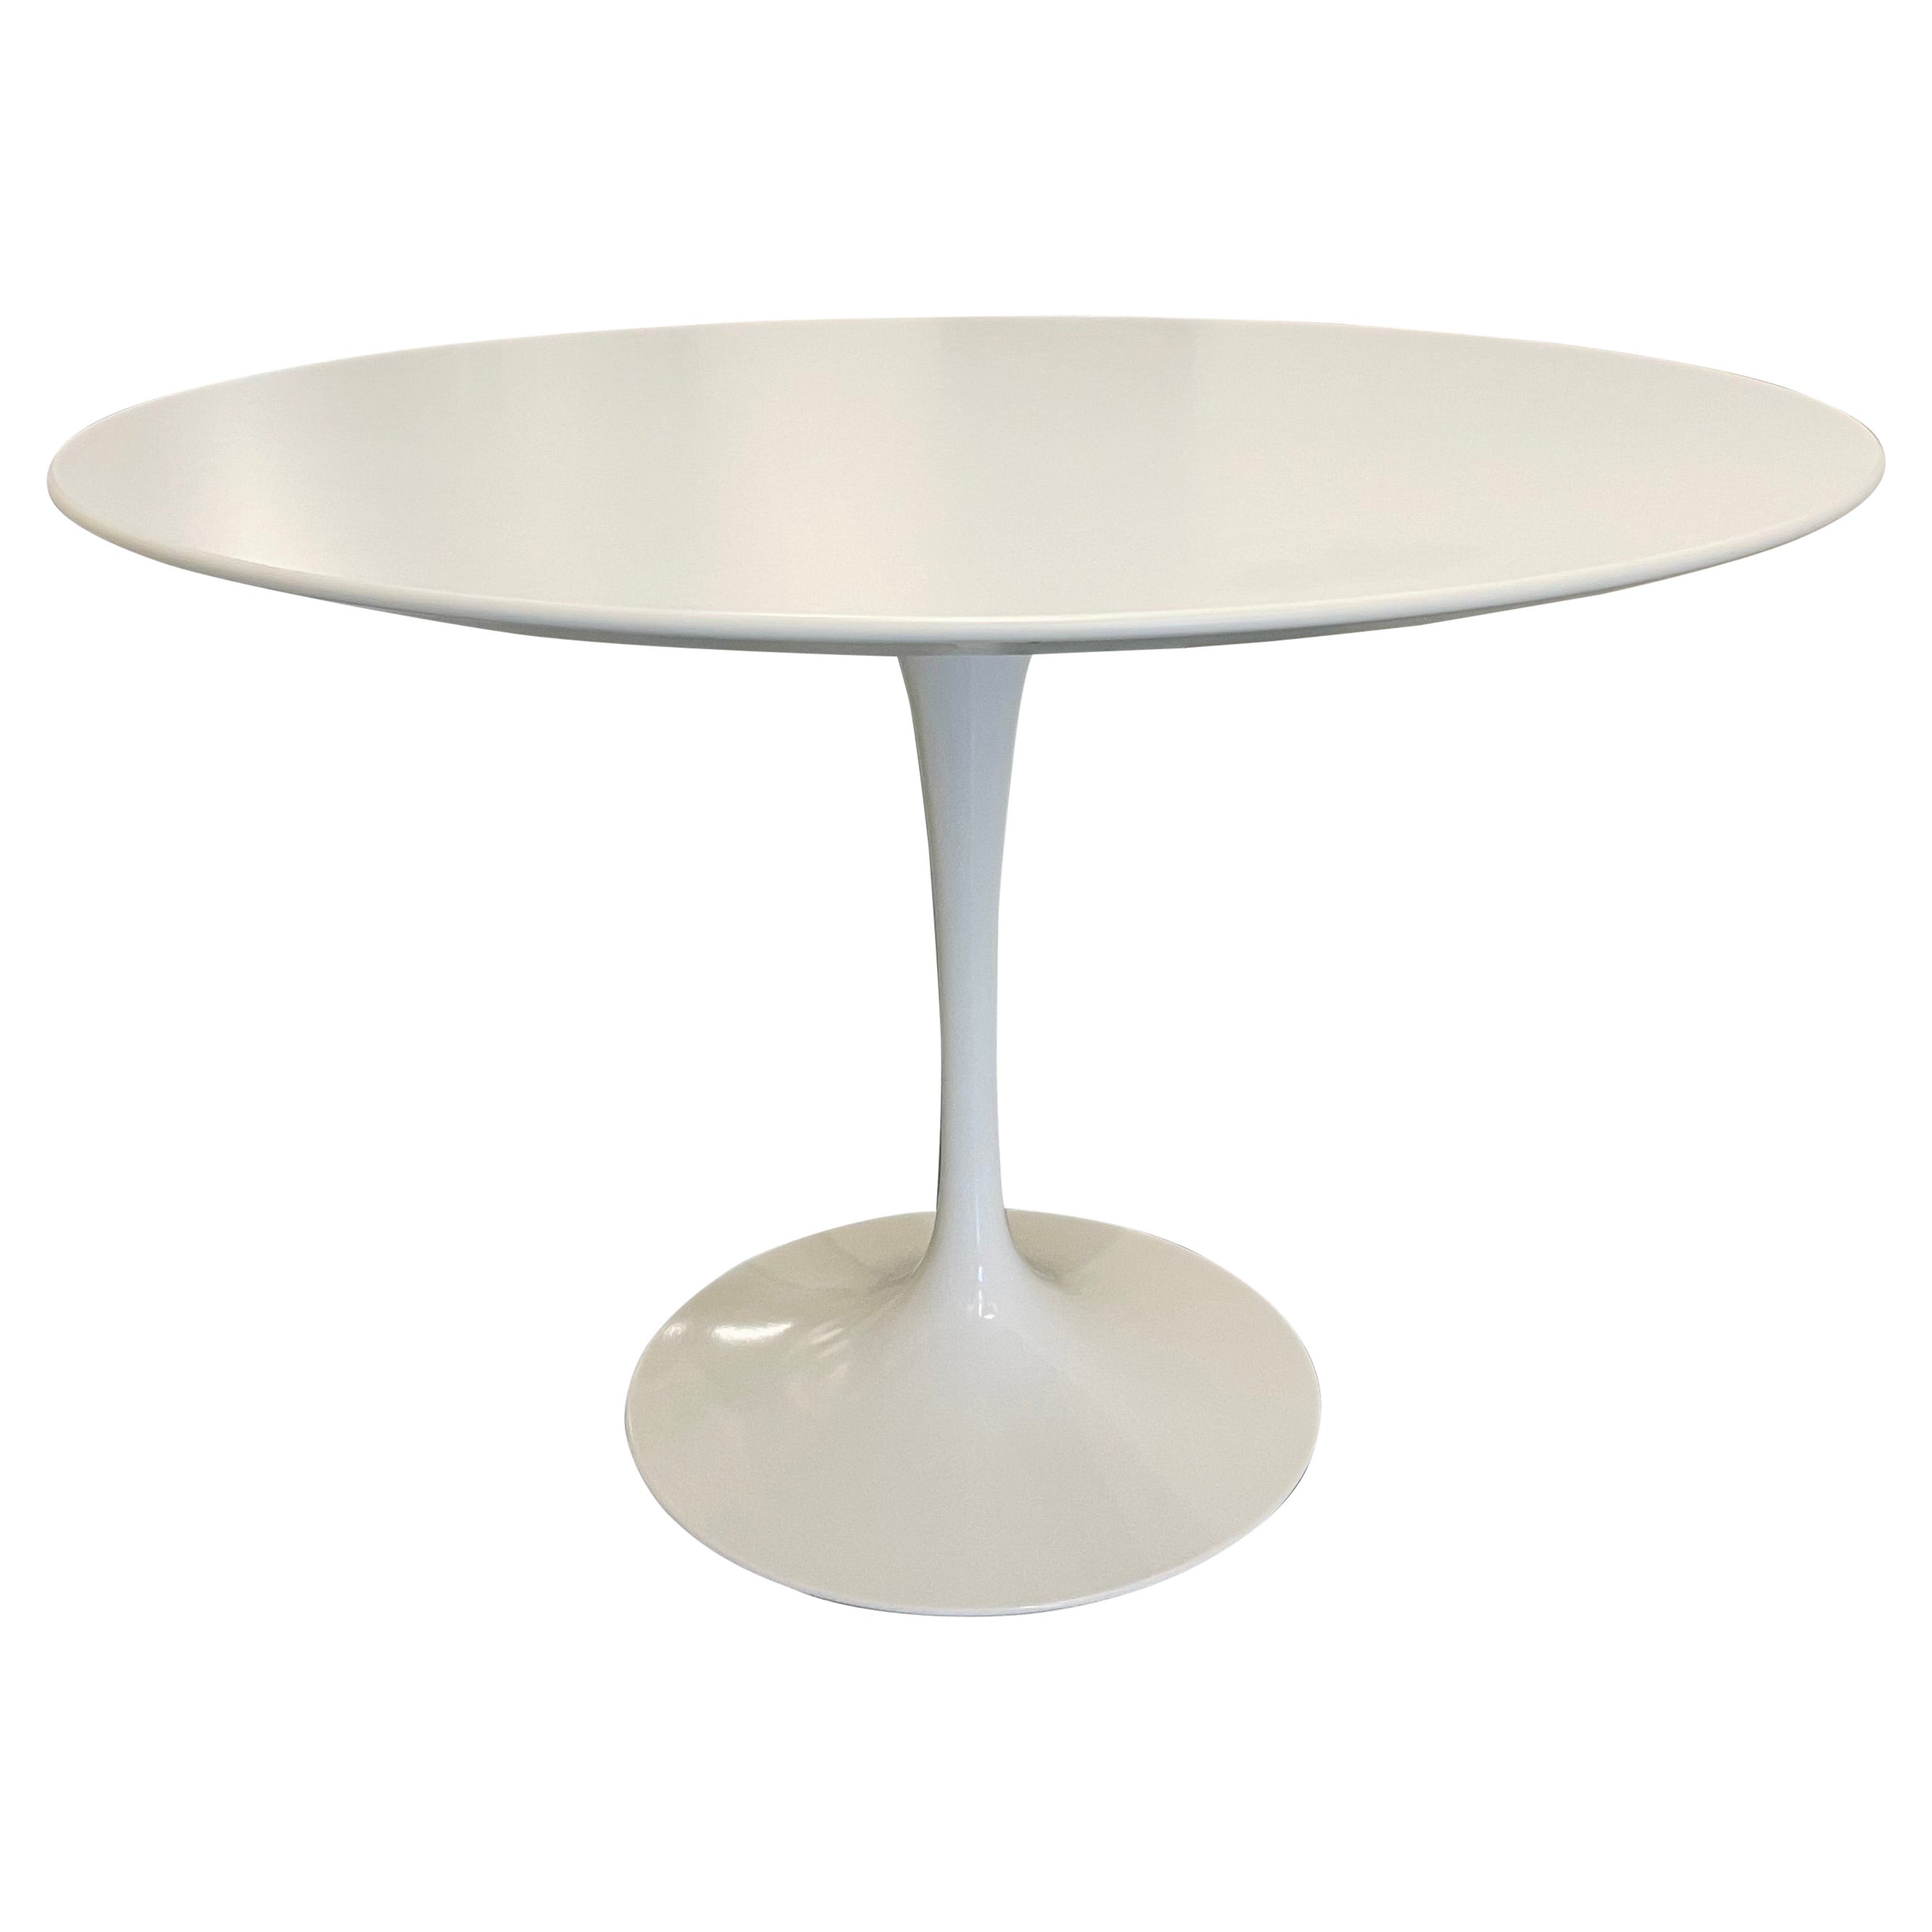 Saarinen Dining Table Round in White Laminate with Satin Finish